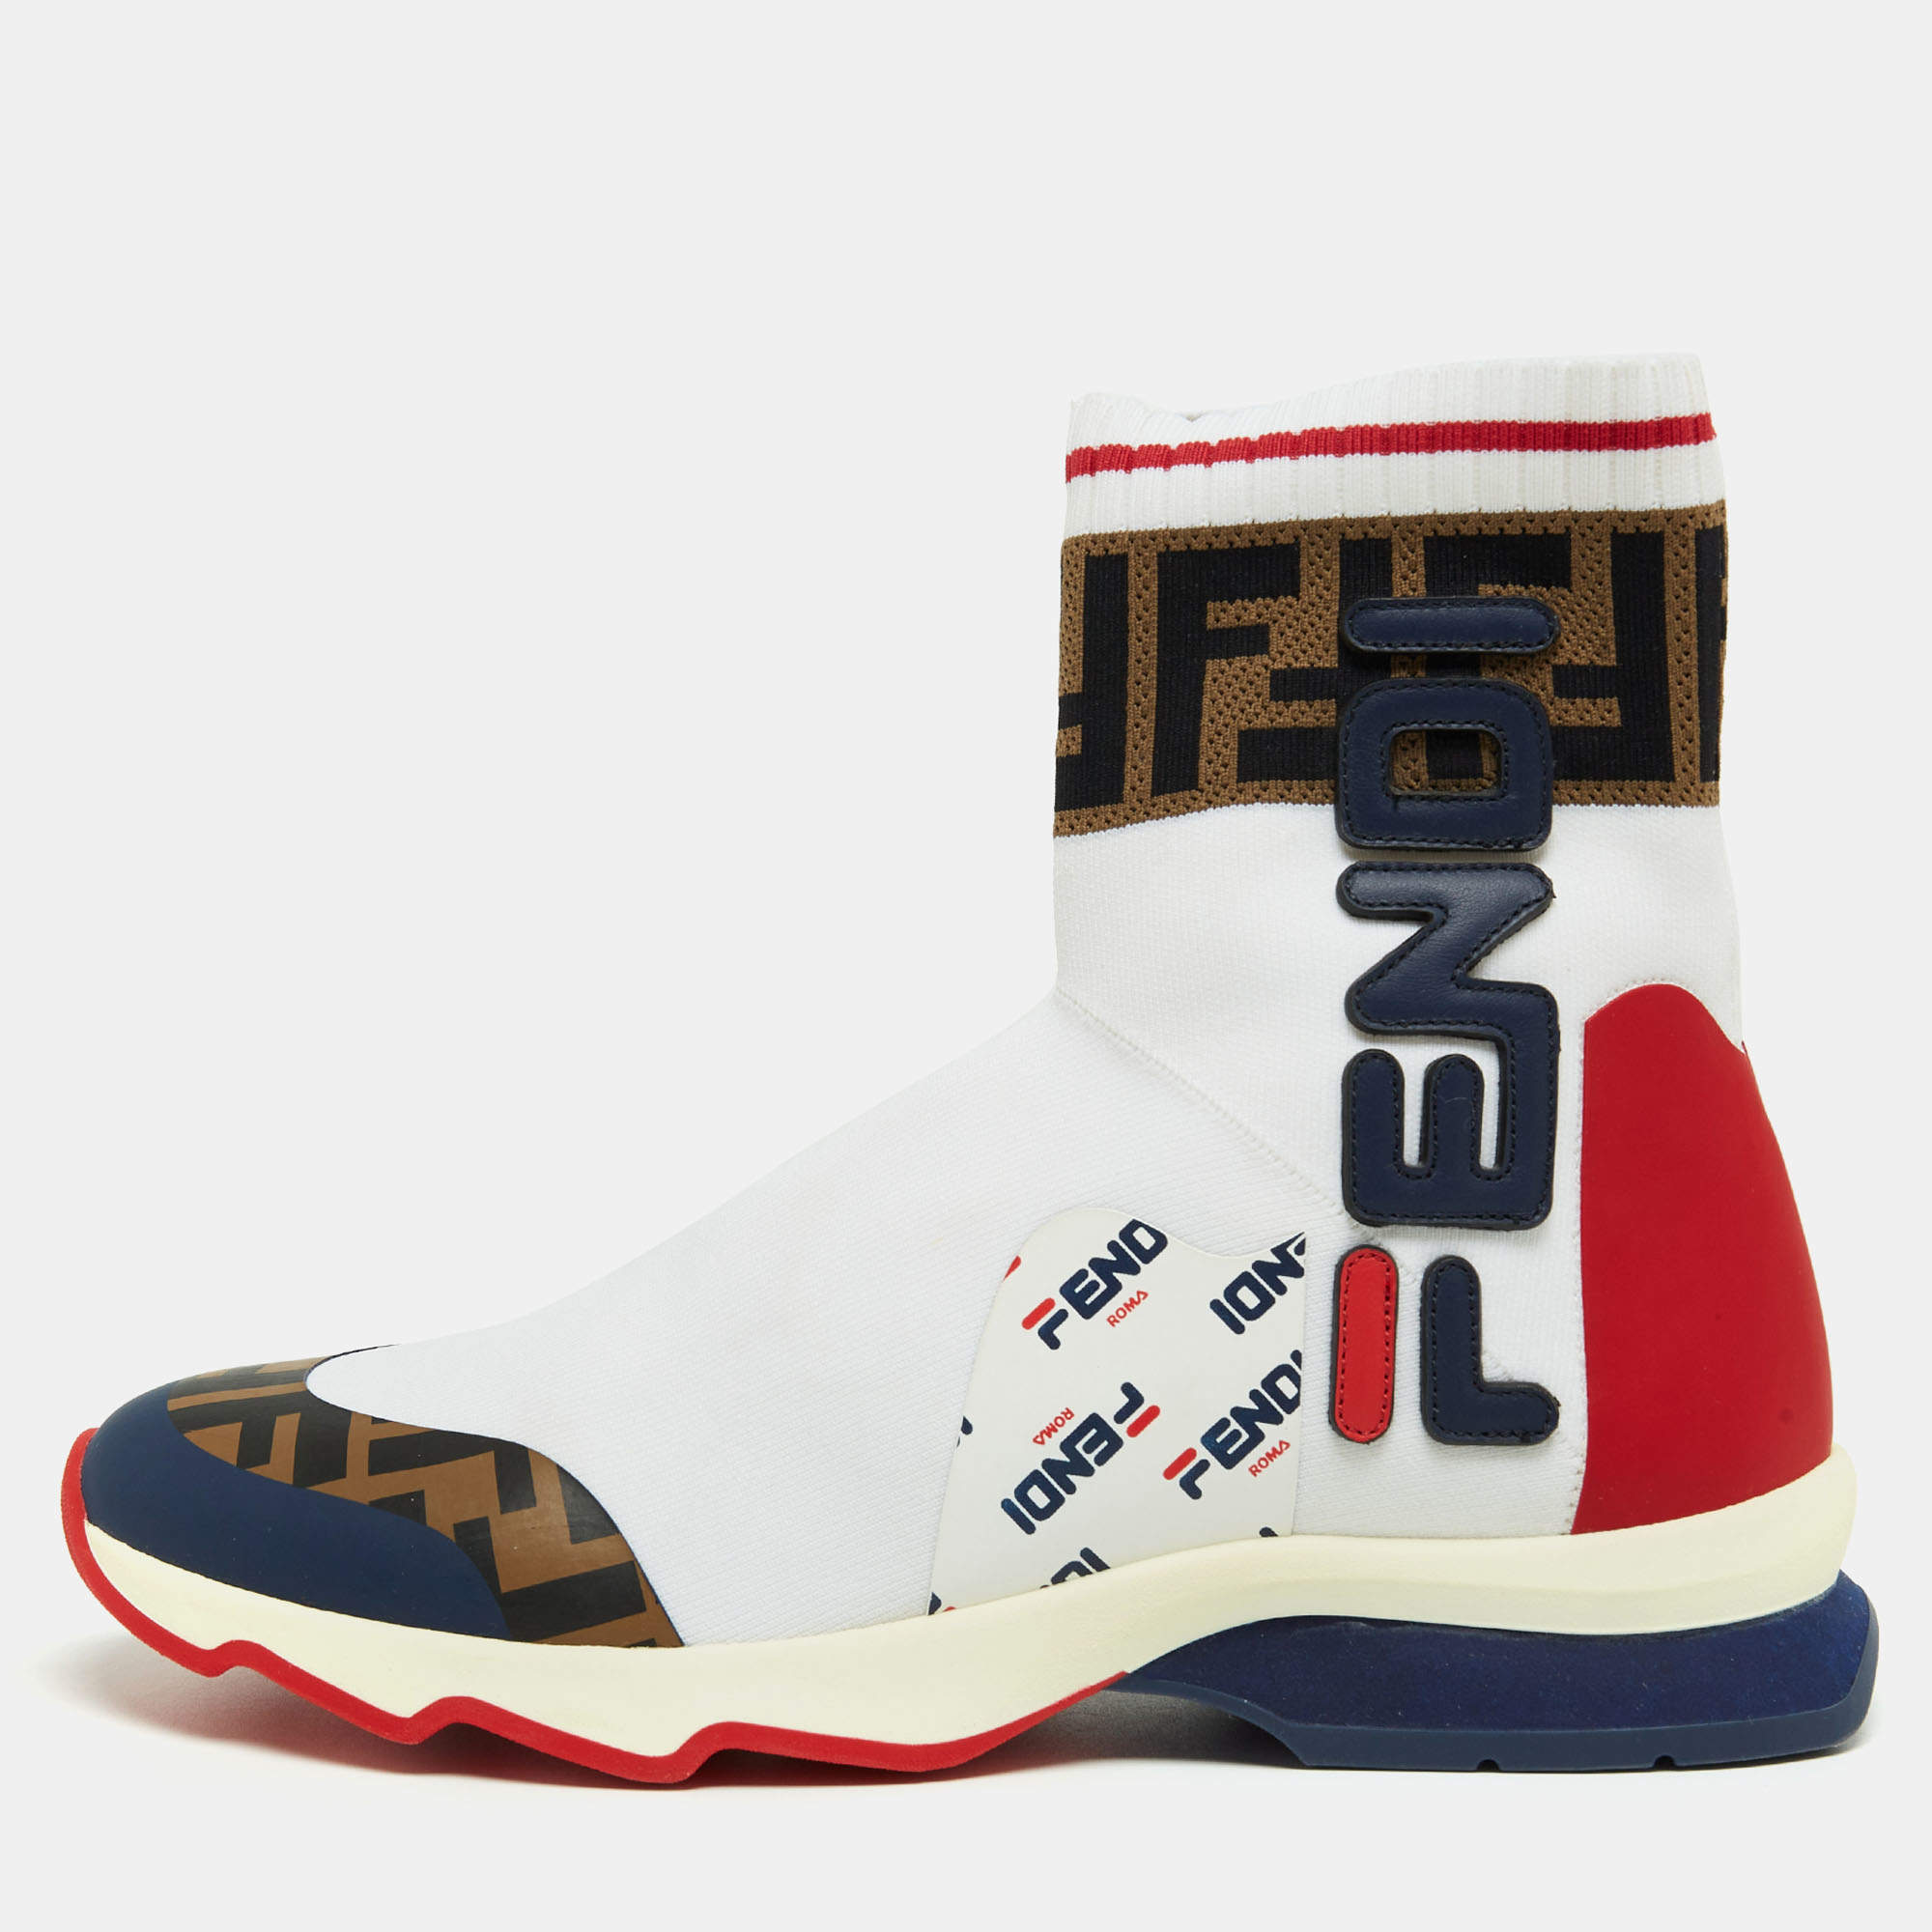 Get A Closer Look At The FILA Chunky Sneaker From The